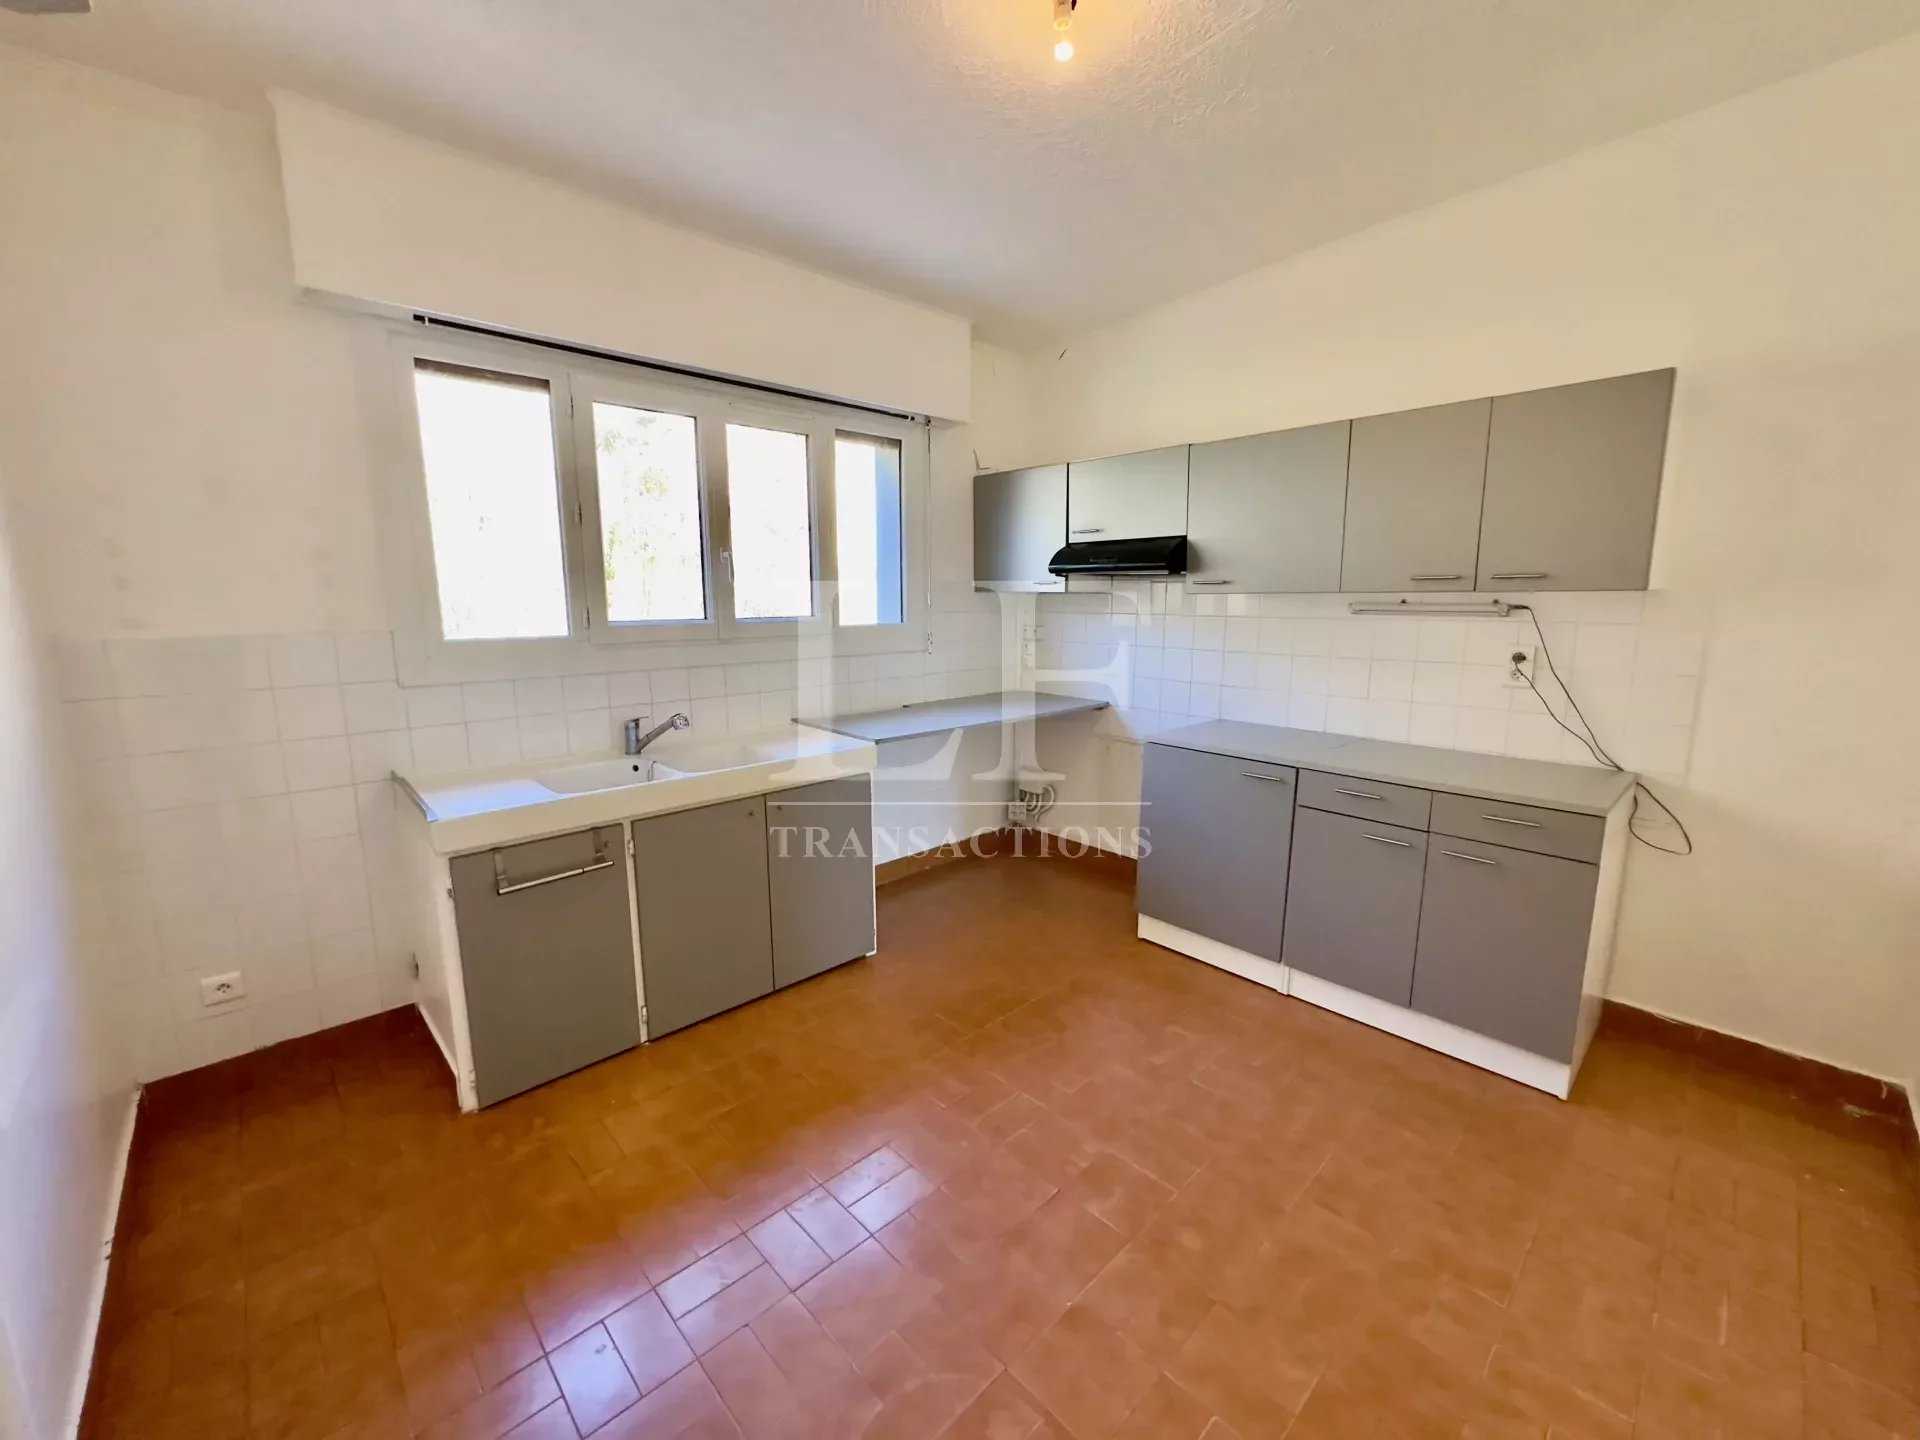 Condominium in Greolieres, Provence-Alpes-Cote d'Azur 12649249